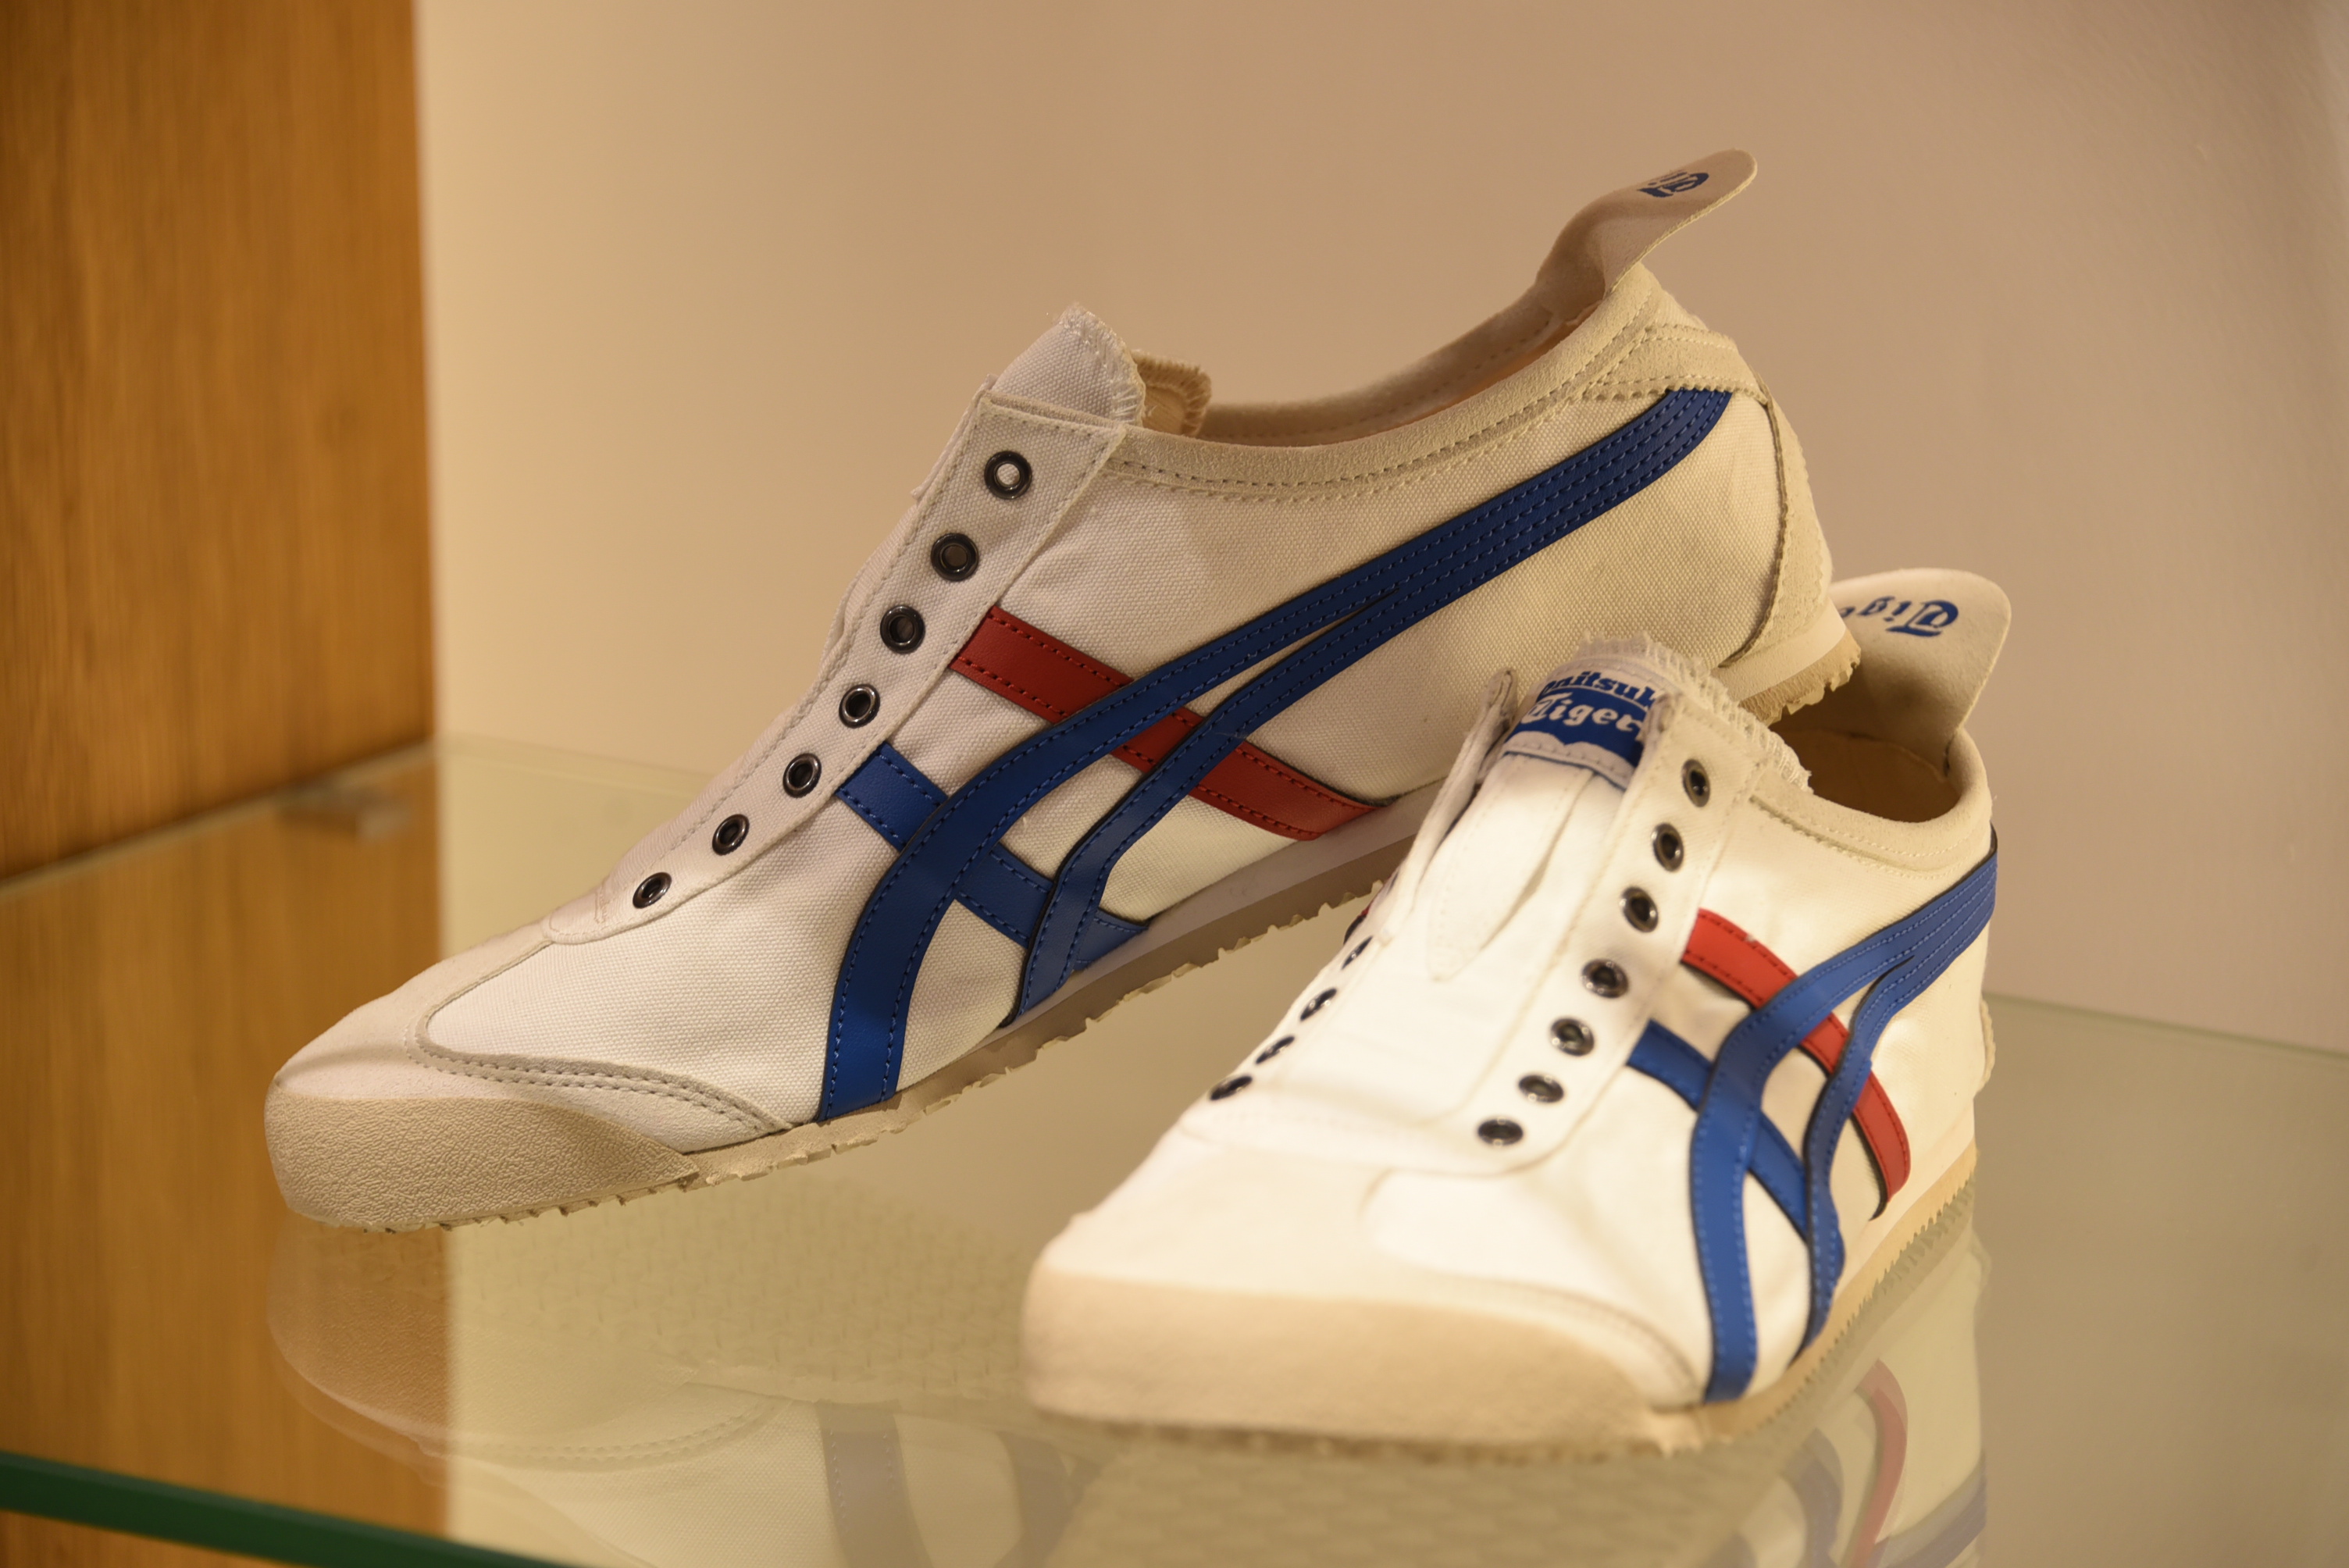 Onitsuka Tiger Opens Its First 